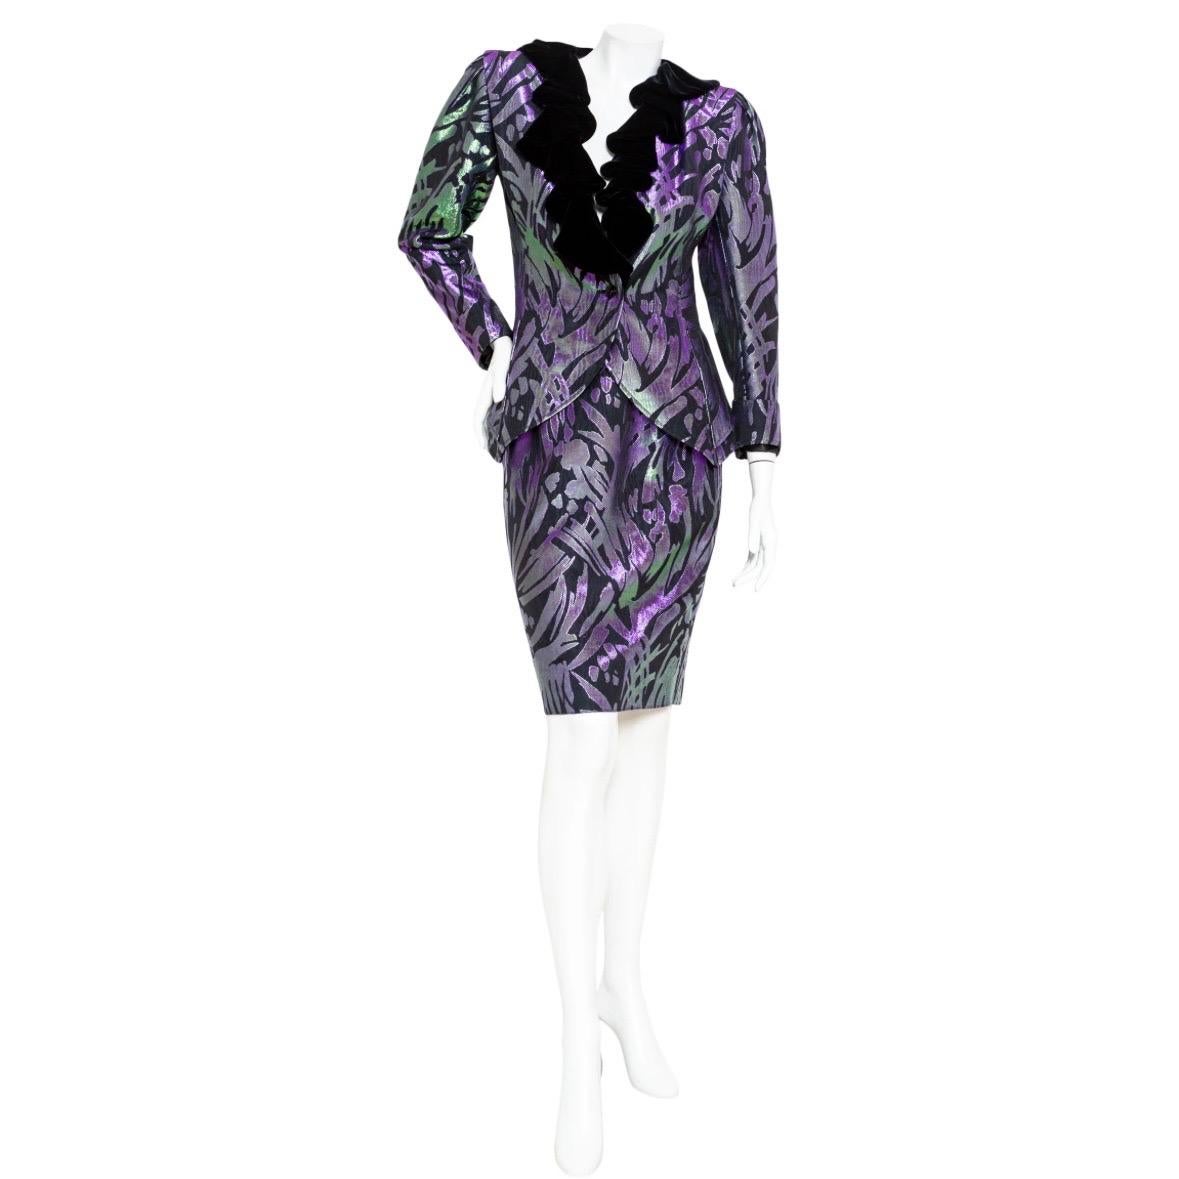 Emanuel Ungaro Vintage Iridescent Jacket and Skirt Suit

Vintage; 1988
Designed for Saks Fifth Avenue
Iridescent shot fabric
Jacket features a cascading ruffled velvet collar, puff sleeves, front button closure, back bow, and fitted silhouette